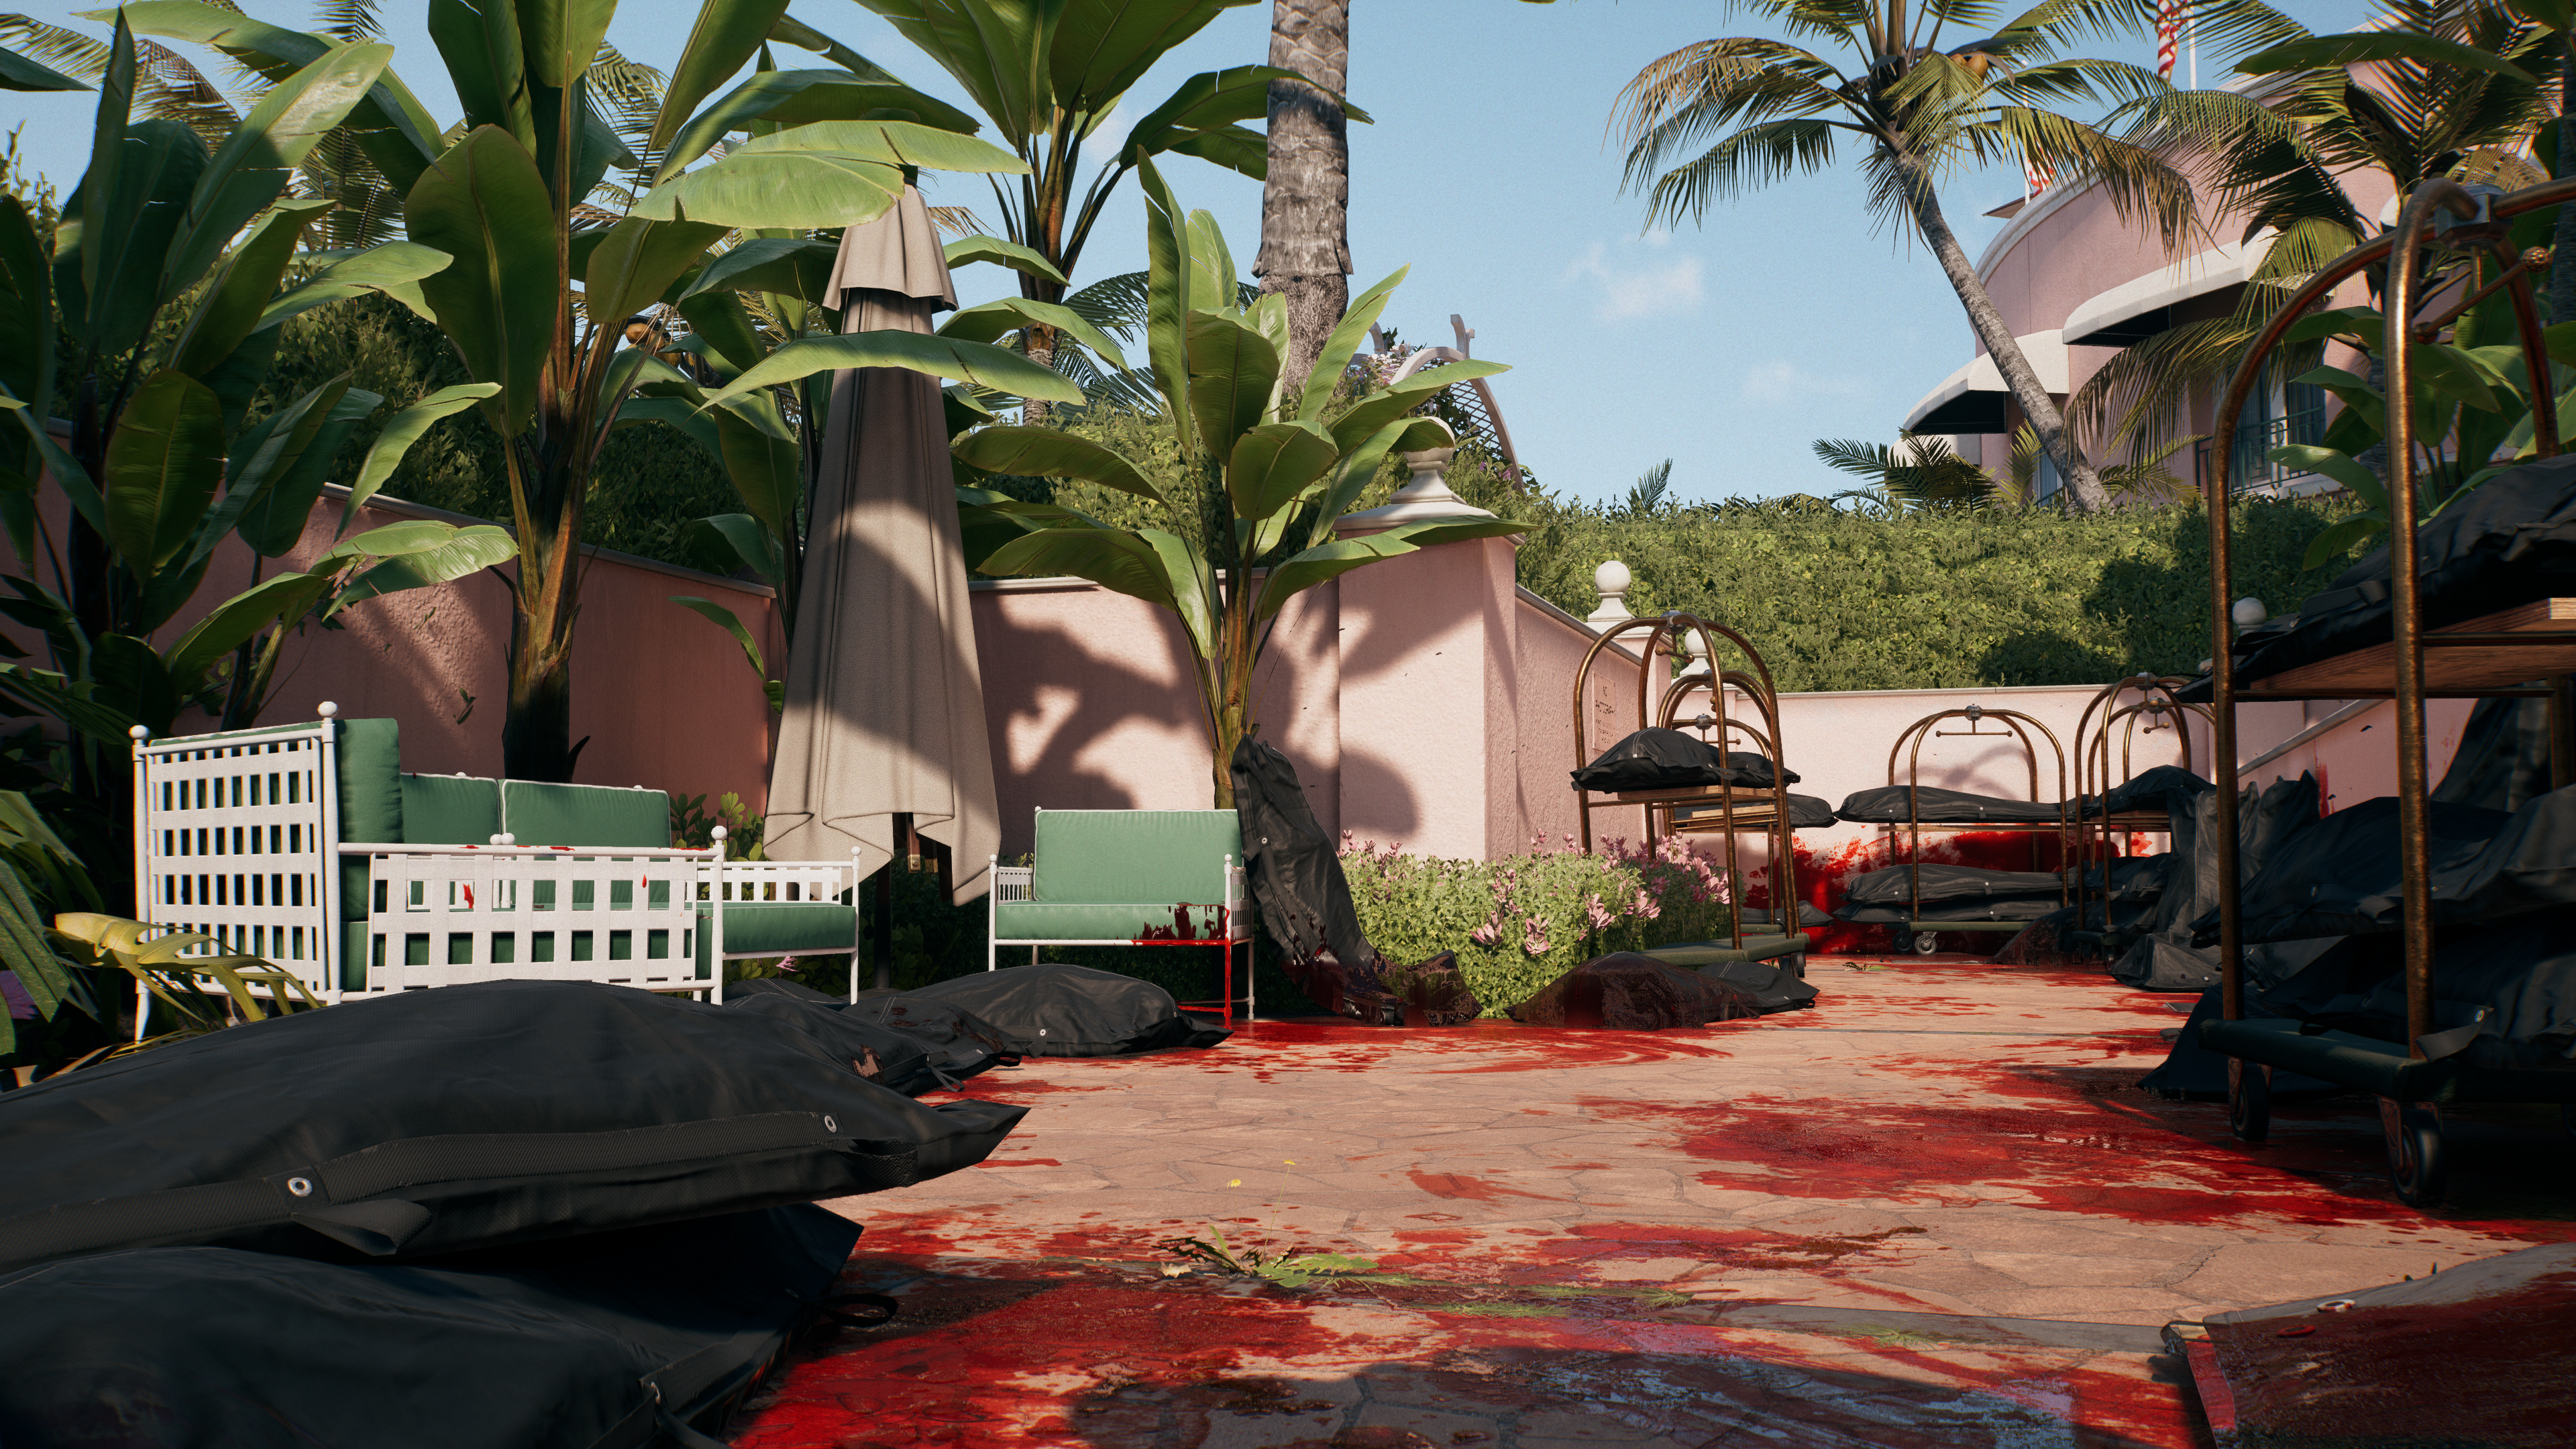 General 3840x2160 Dead Island 2 Nvidia RTX video games CGI palm trees leaves blood chair flowers sky clouds gore video game art screen shot